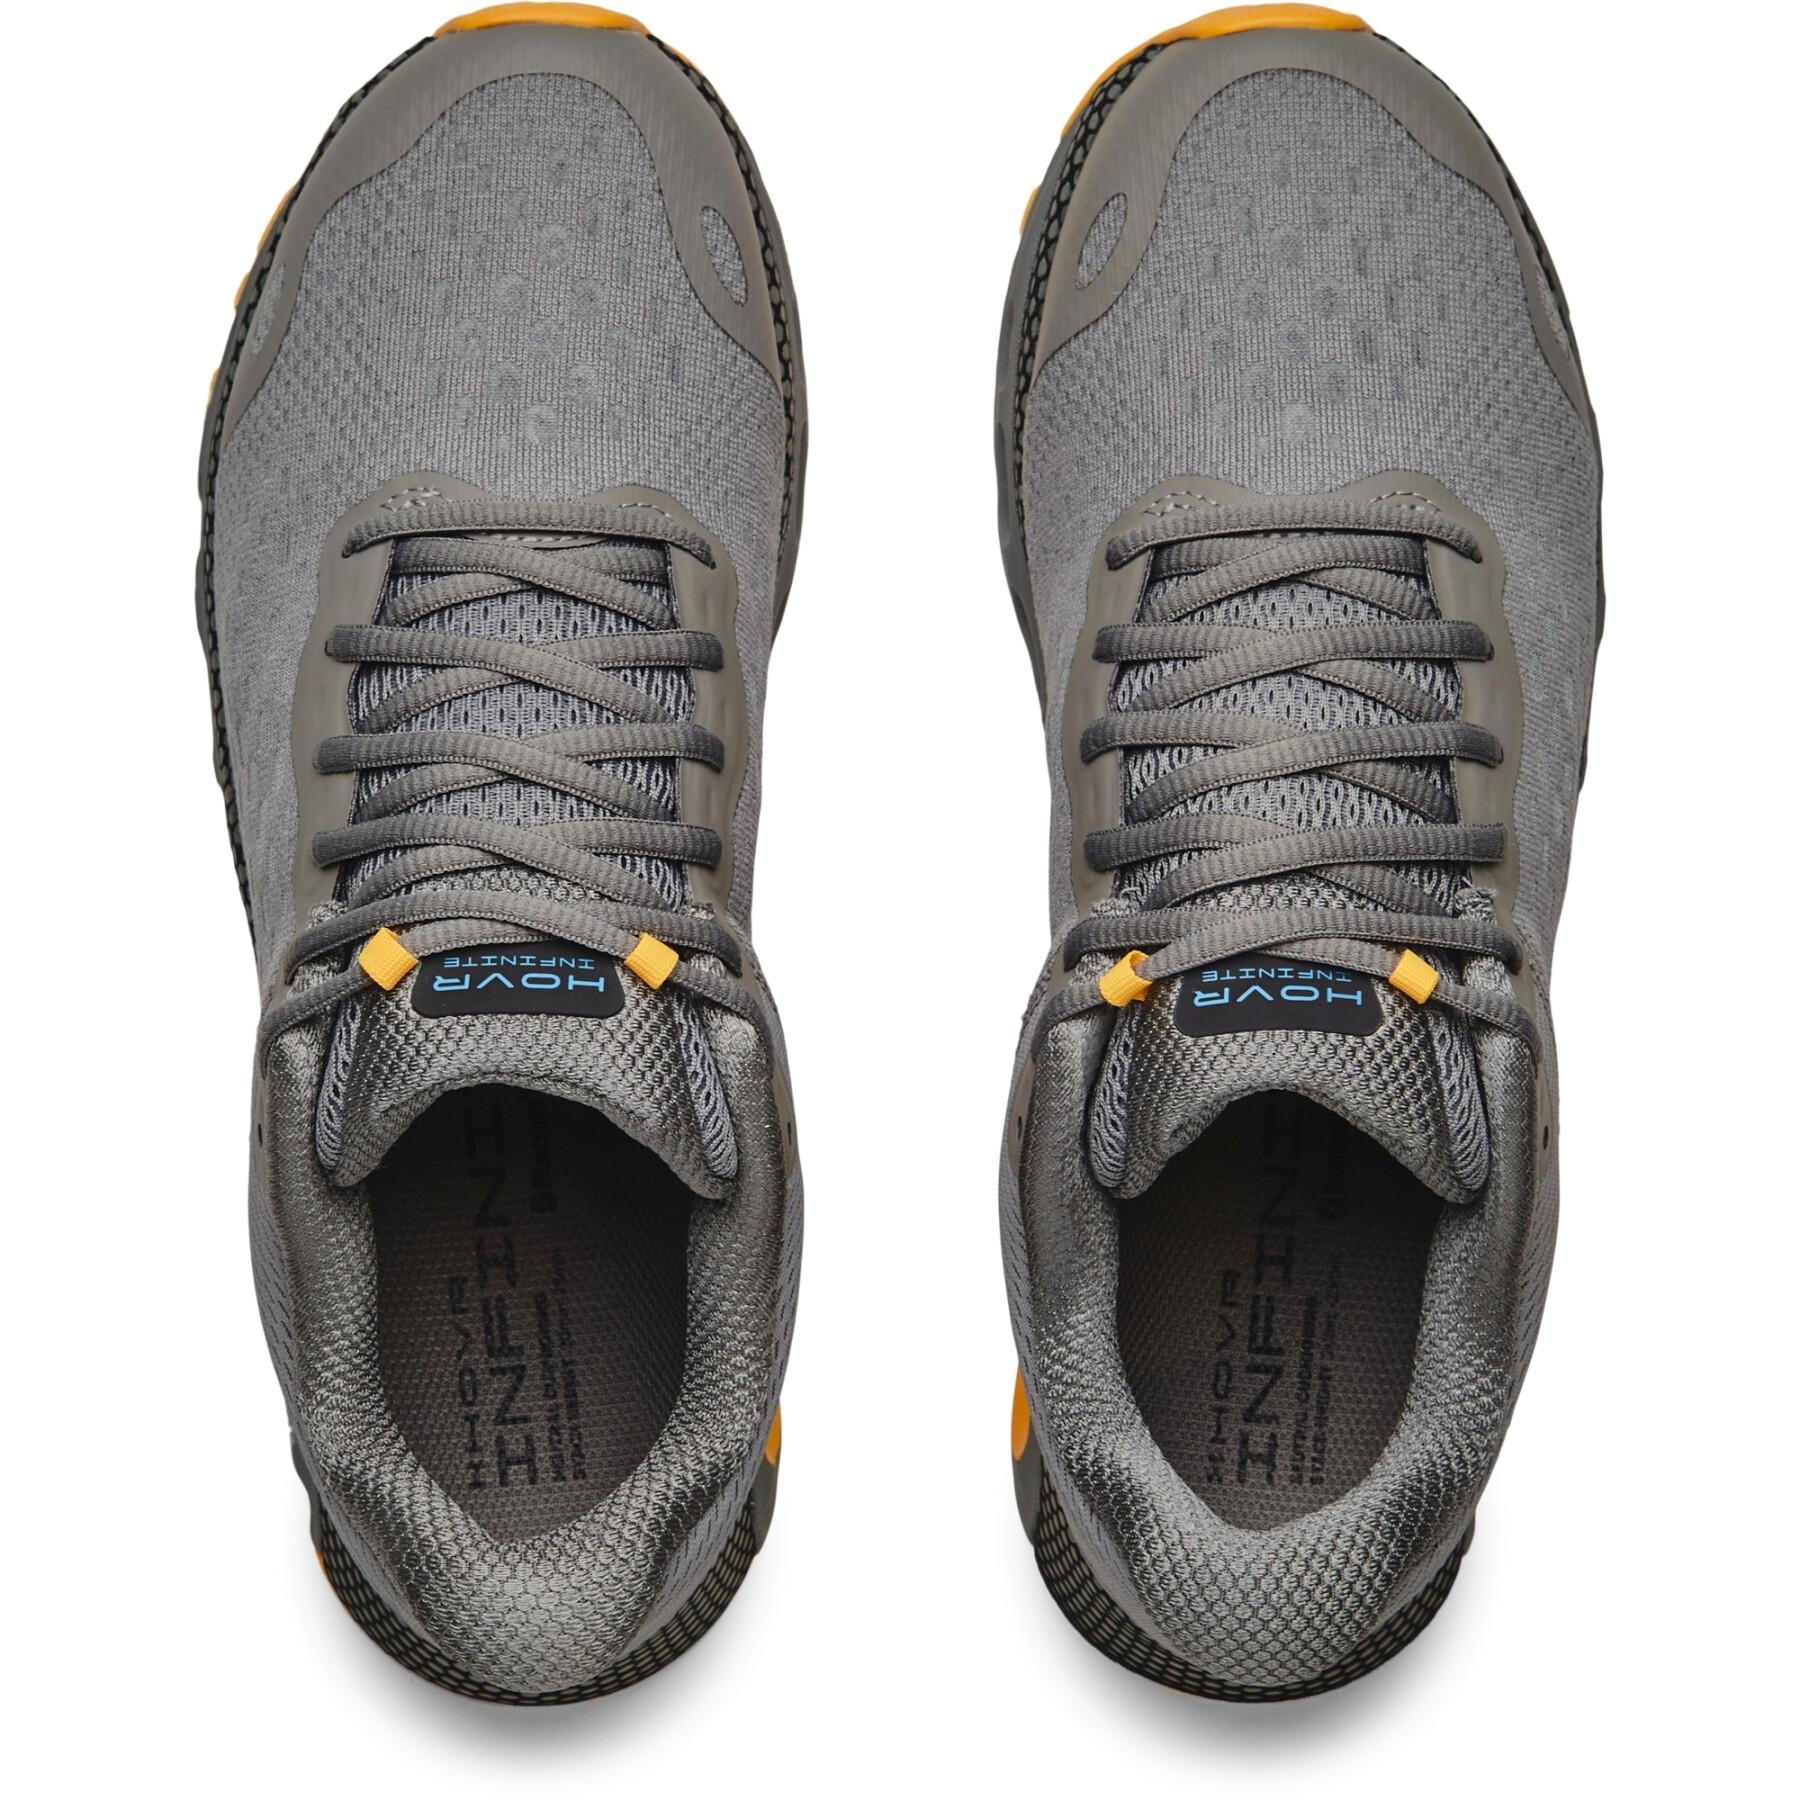 Running shoes Under Armour HOVR™ Infinite 3